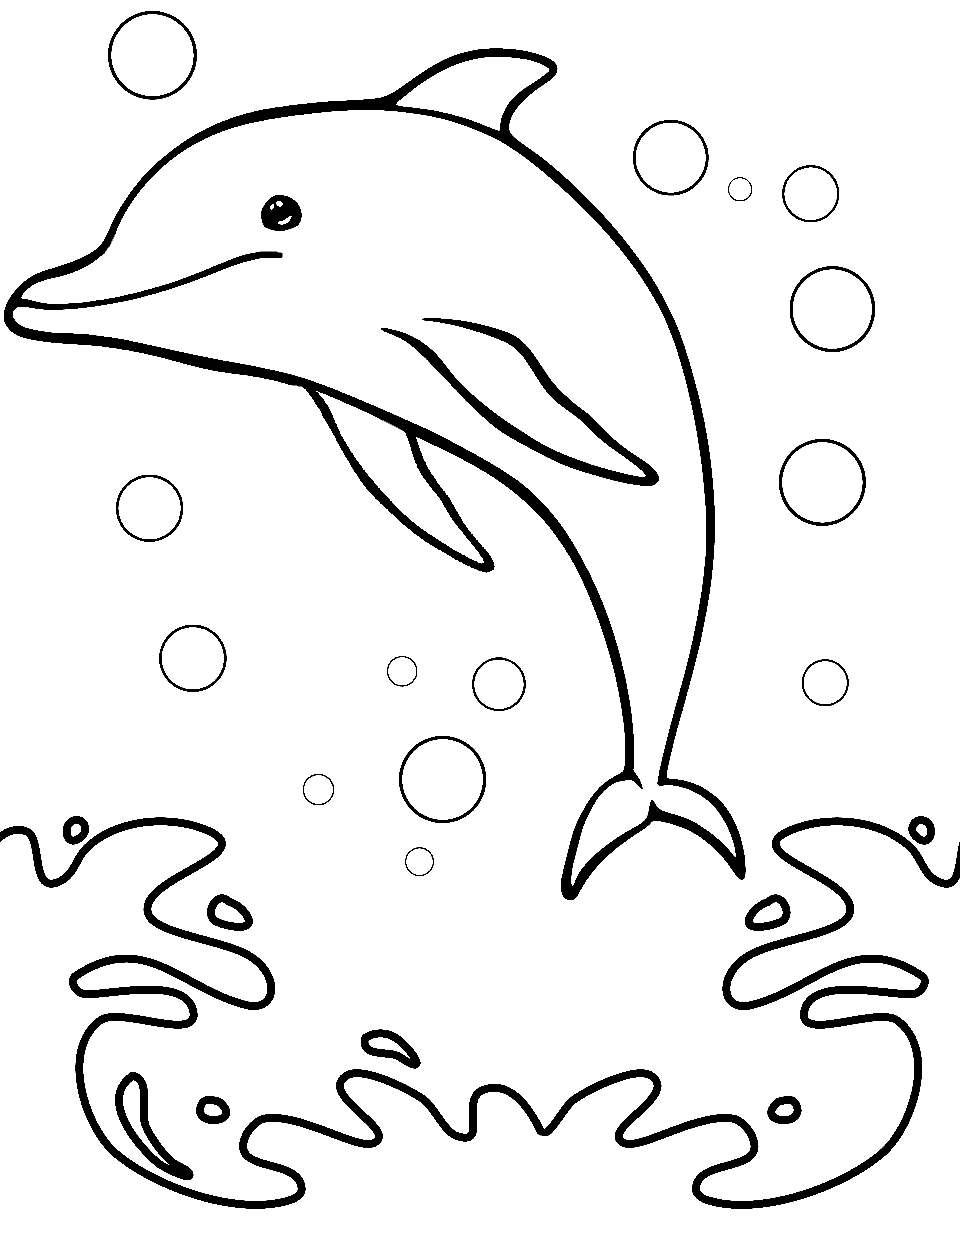 Playful Dolphin Jumping Coloring Page - A cheerful dolphin making a high jump from the glittering ocean waves.